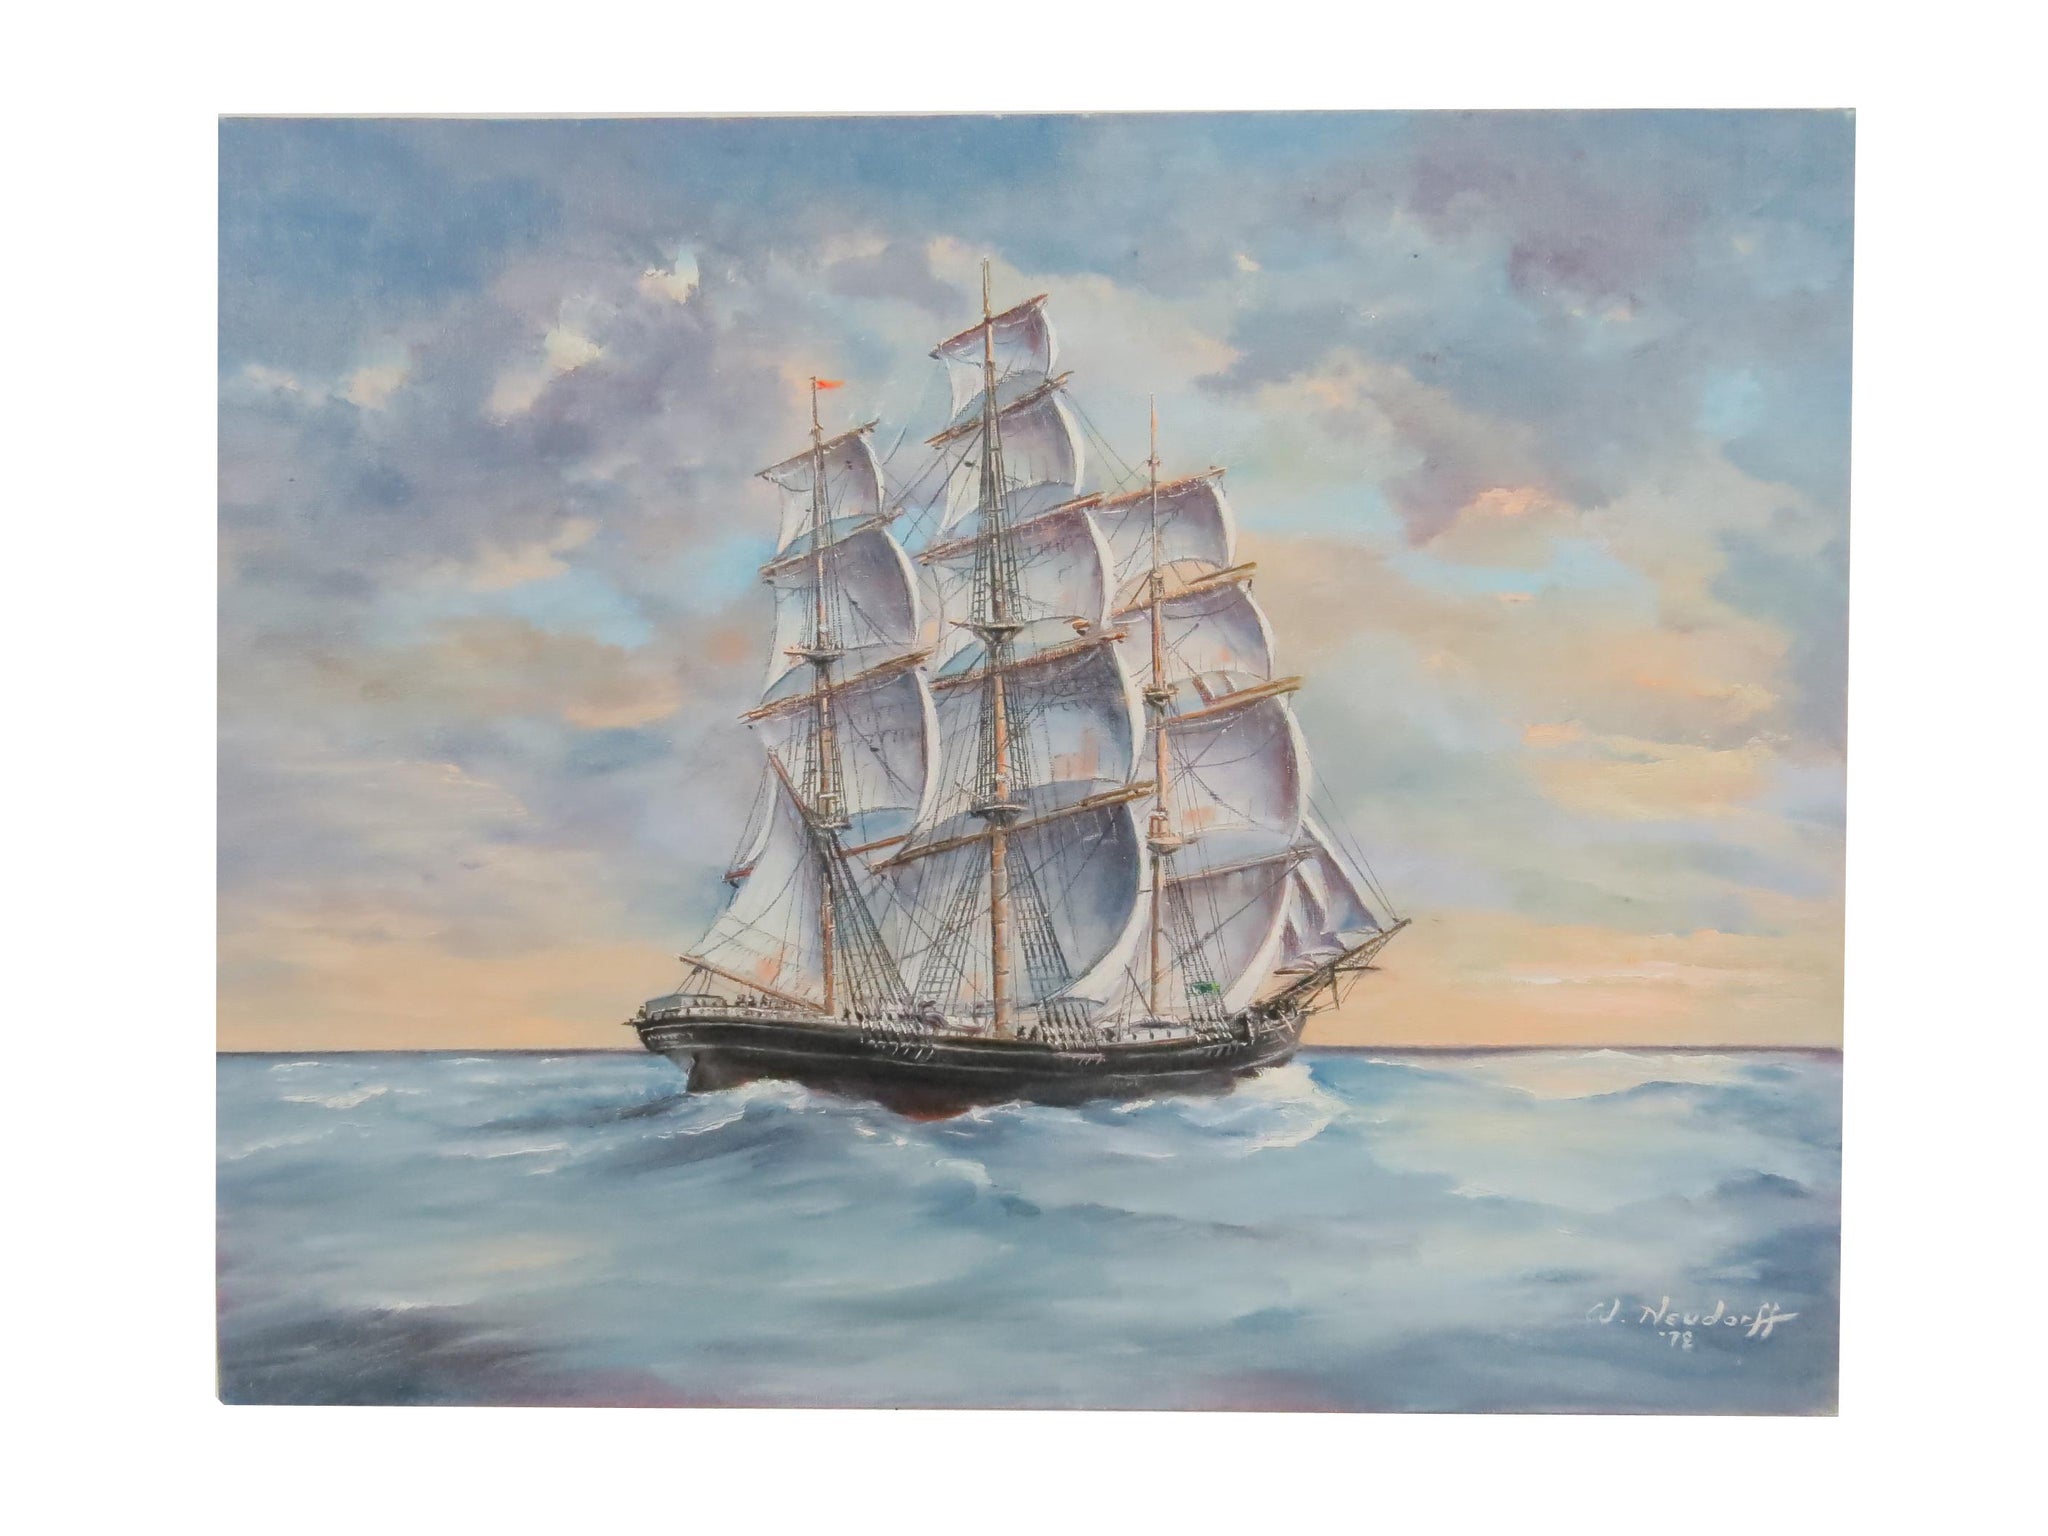 edgebrookhouse - 1972 Werner Neudorff Nautical Oil on Canvas Board of the Famed Clipper Ship "The Lightning"